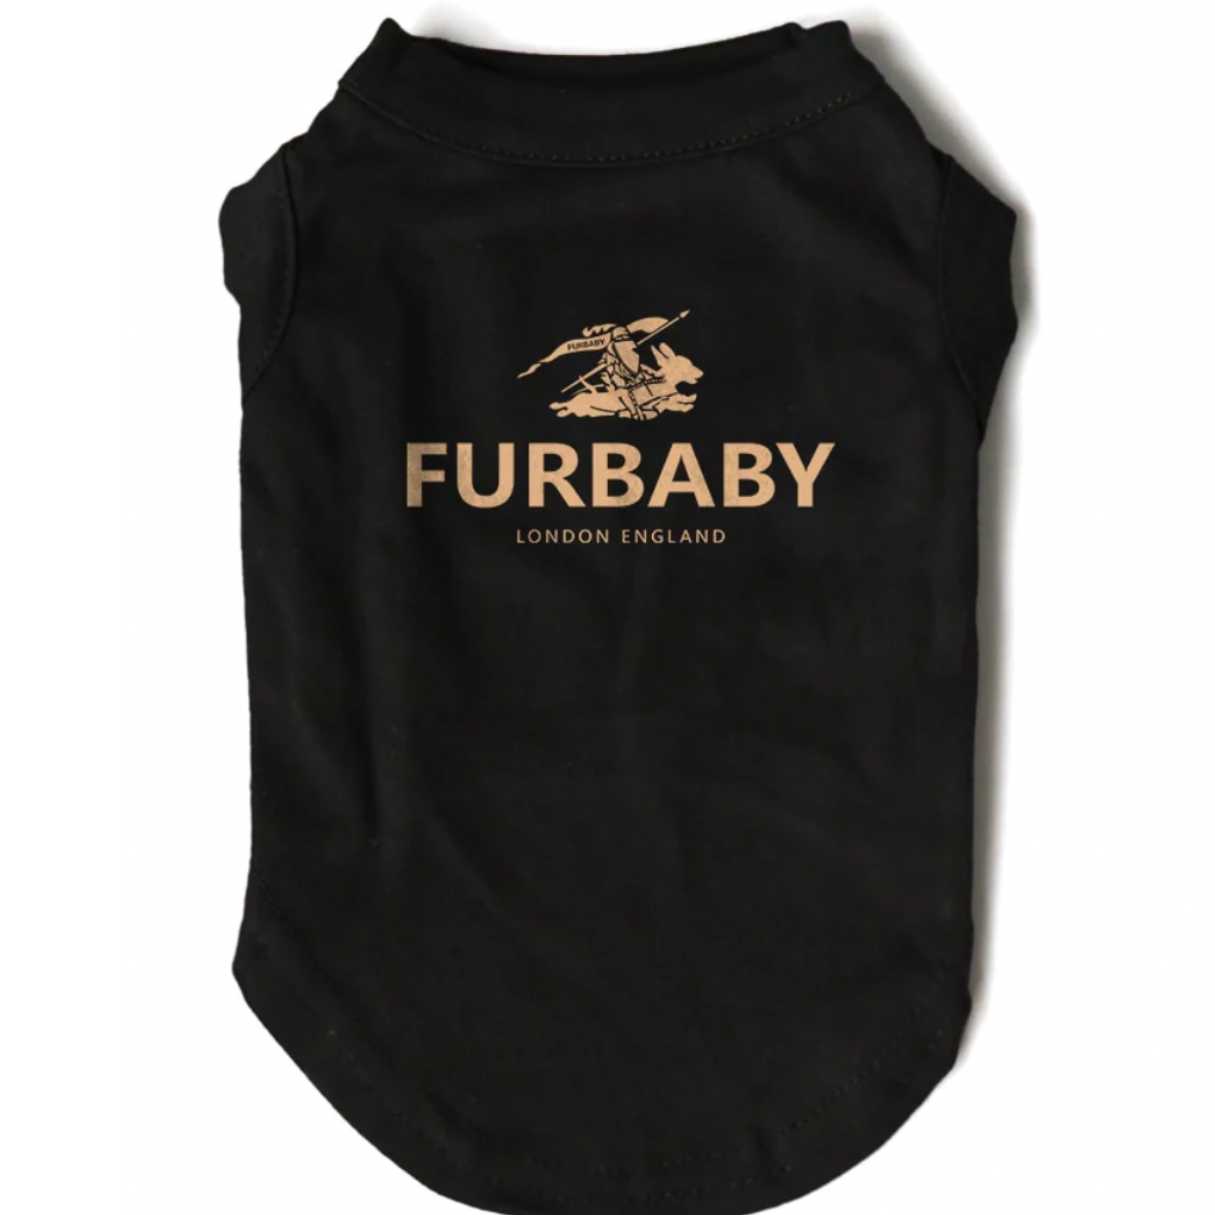 Black Furbaby Dog Tshirt, singlet, sleeveless, top Dog Clothing with furbaby written on it on gold